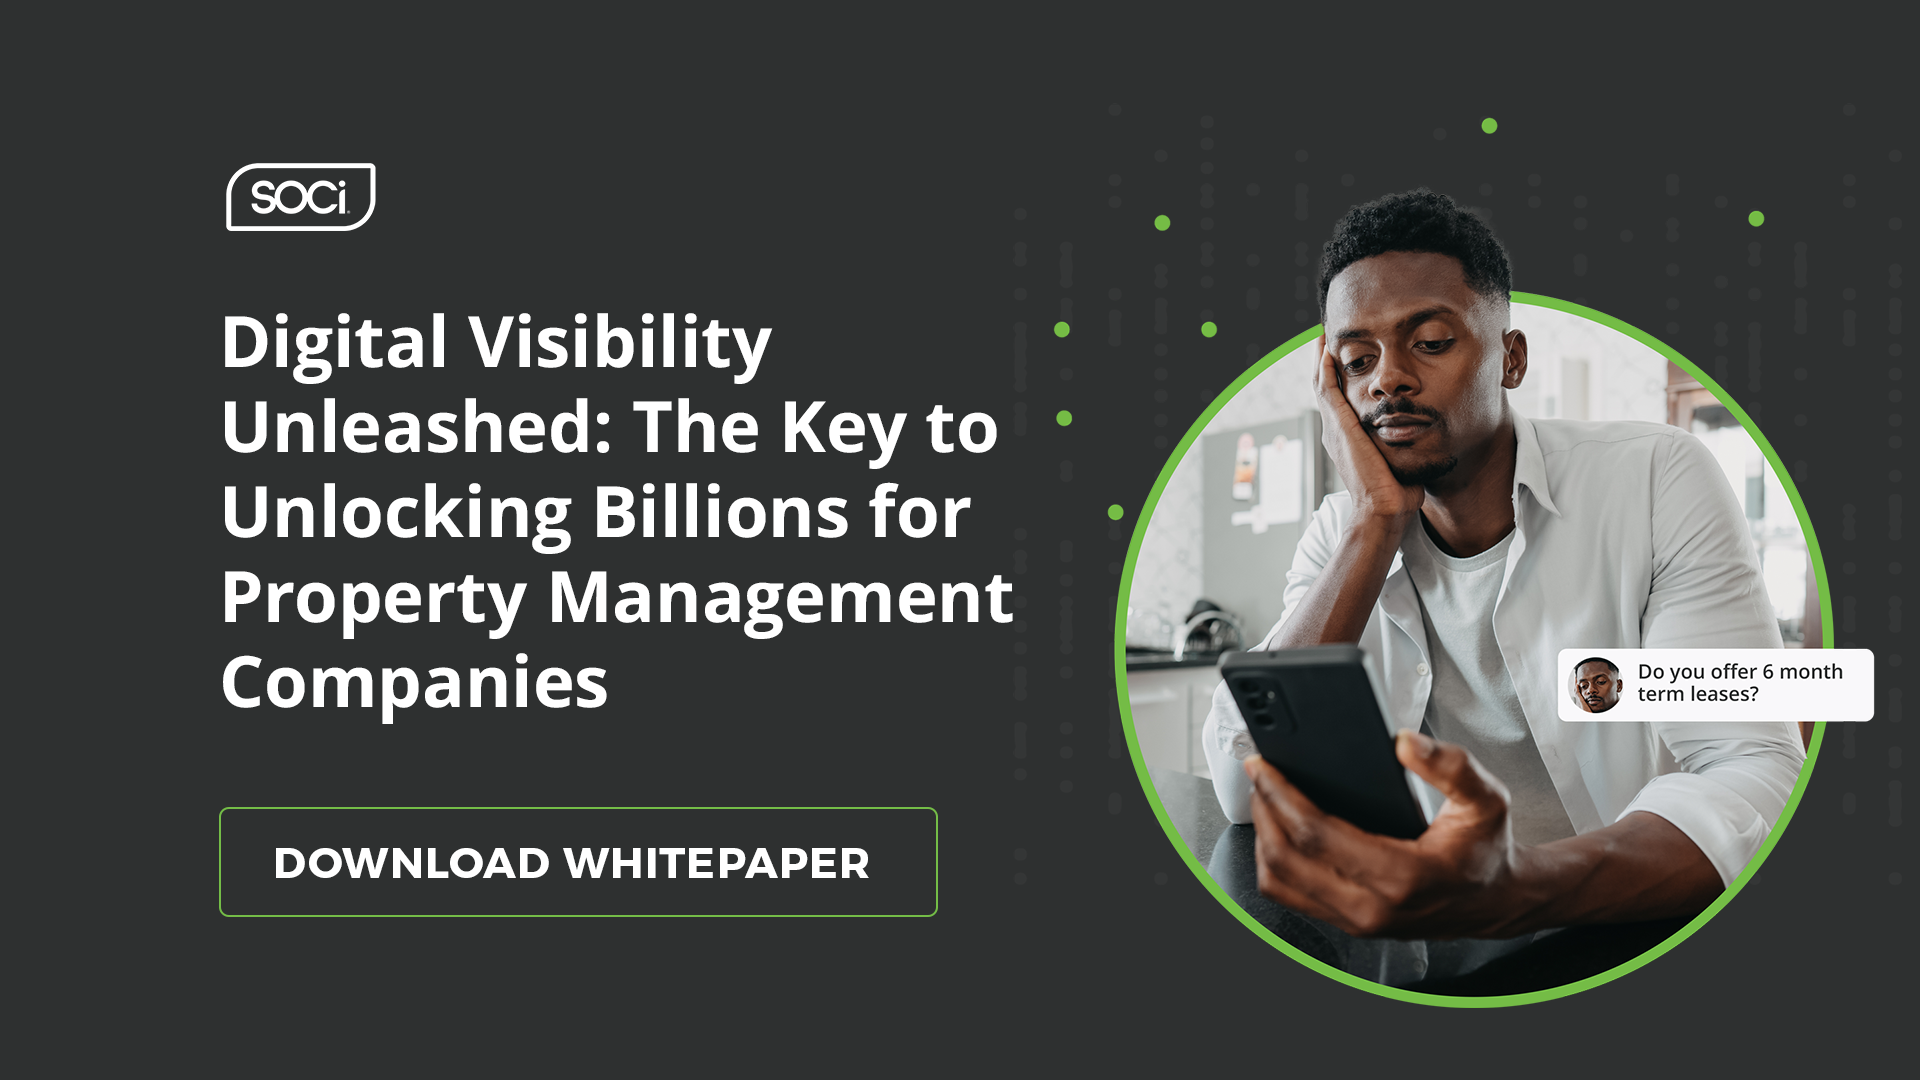 Digital Visibility Unleashed- The Key to Unlocking Billions for Property Management Companies - Insight Header 1920x1080